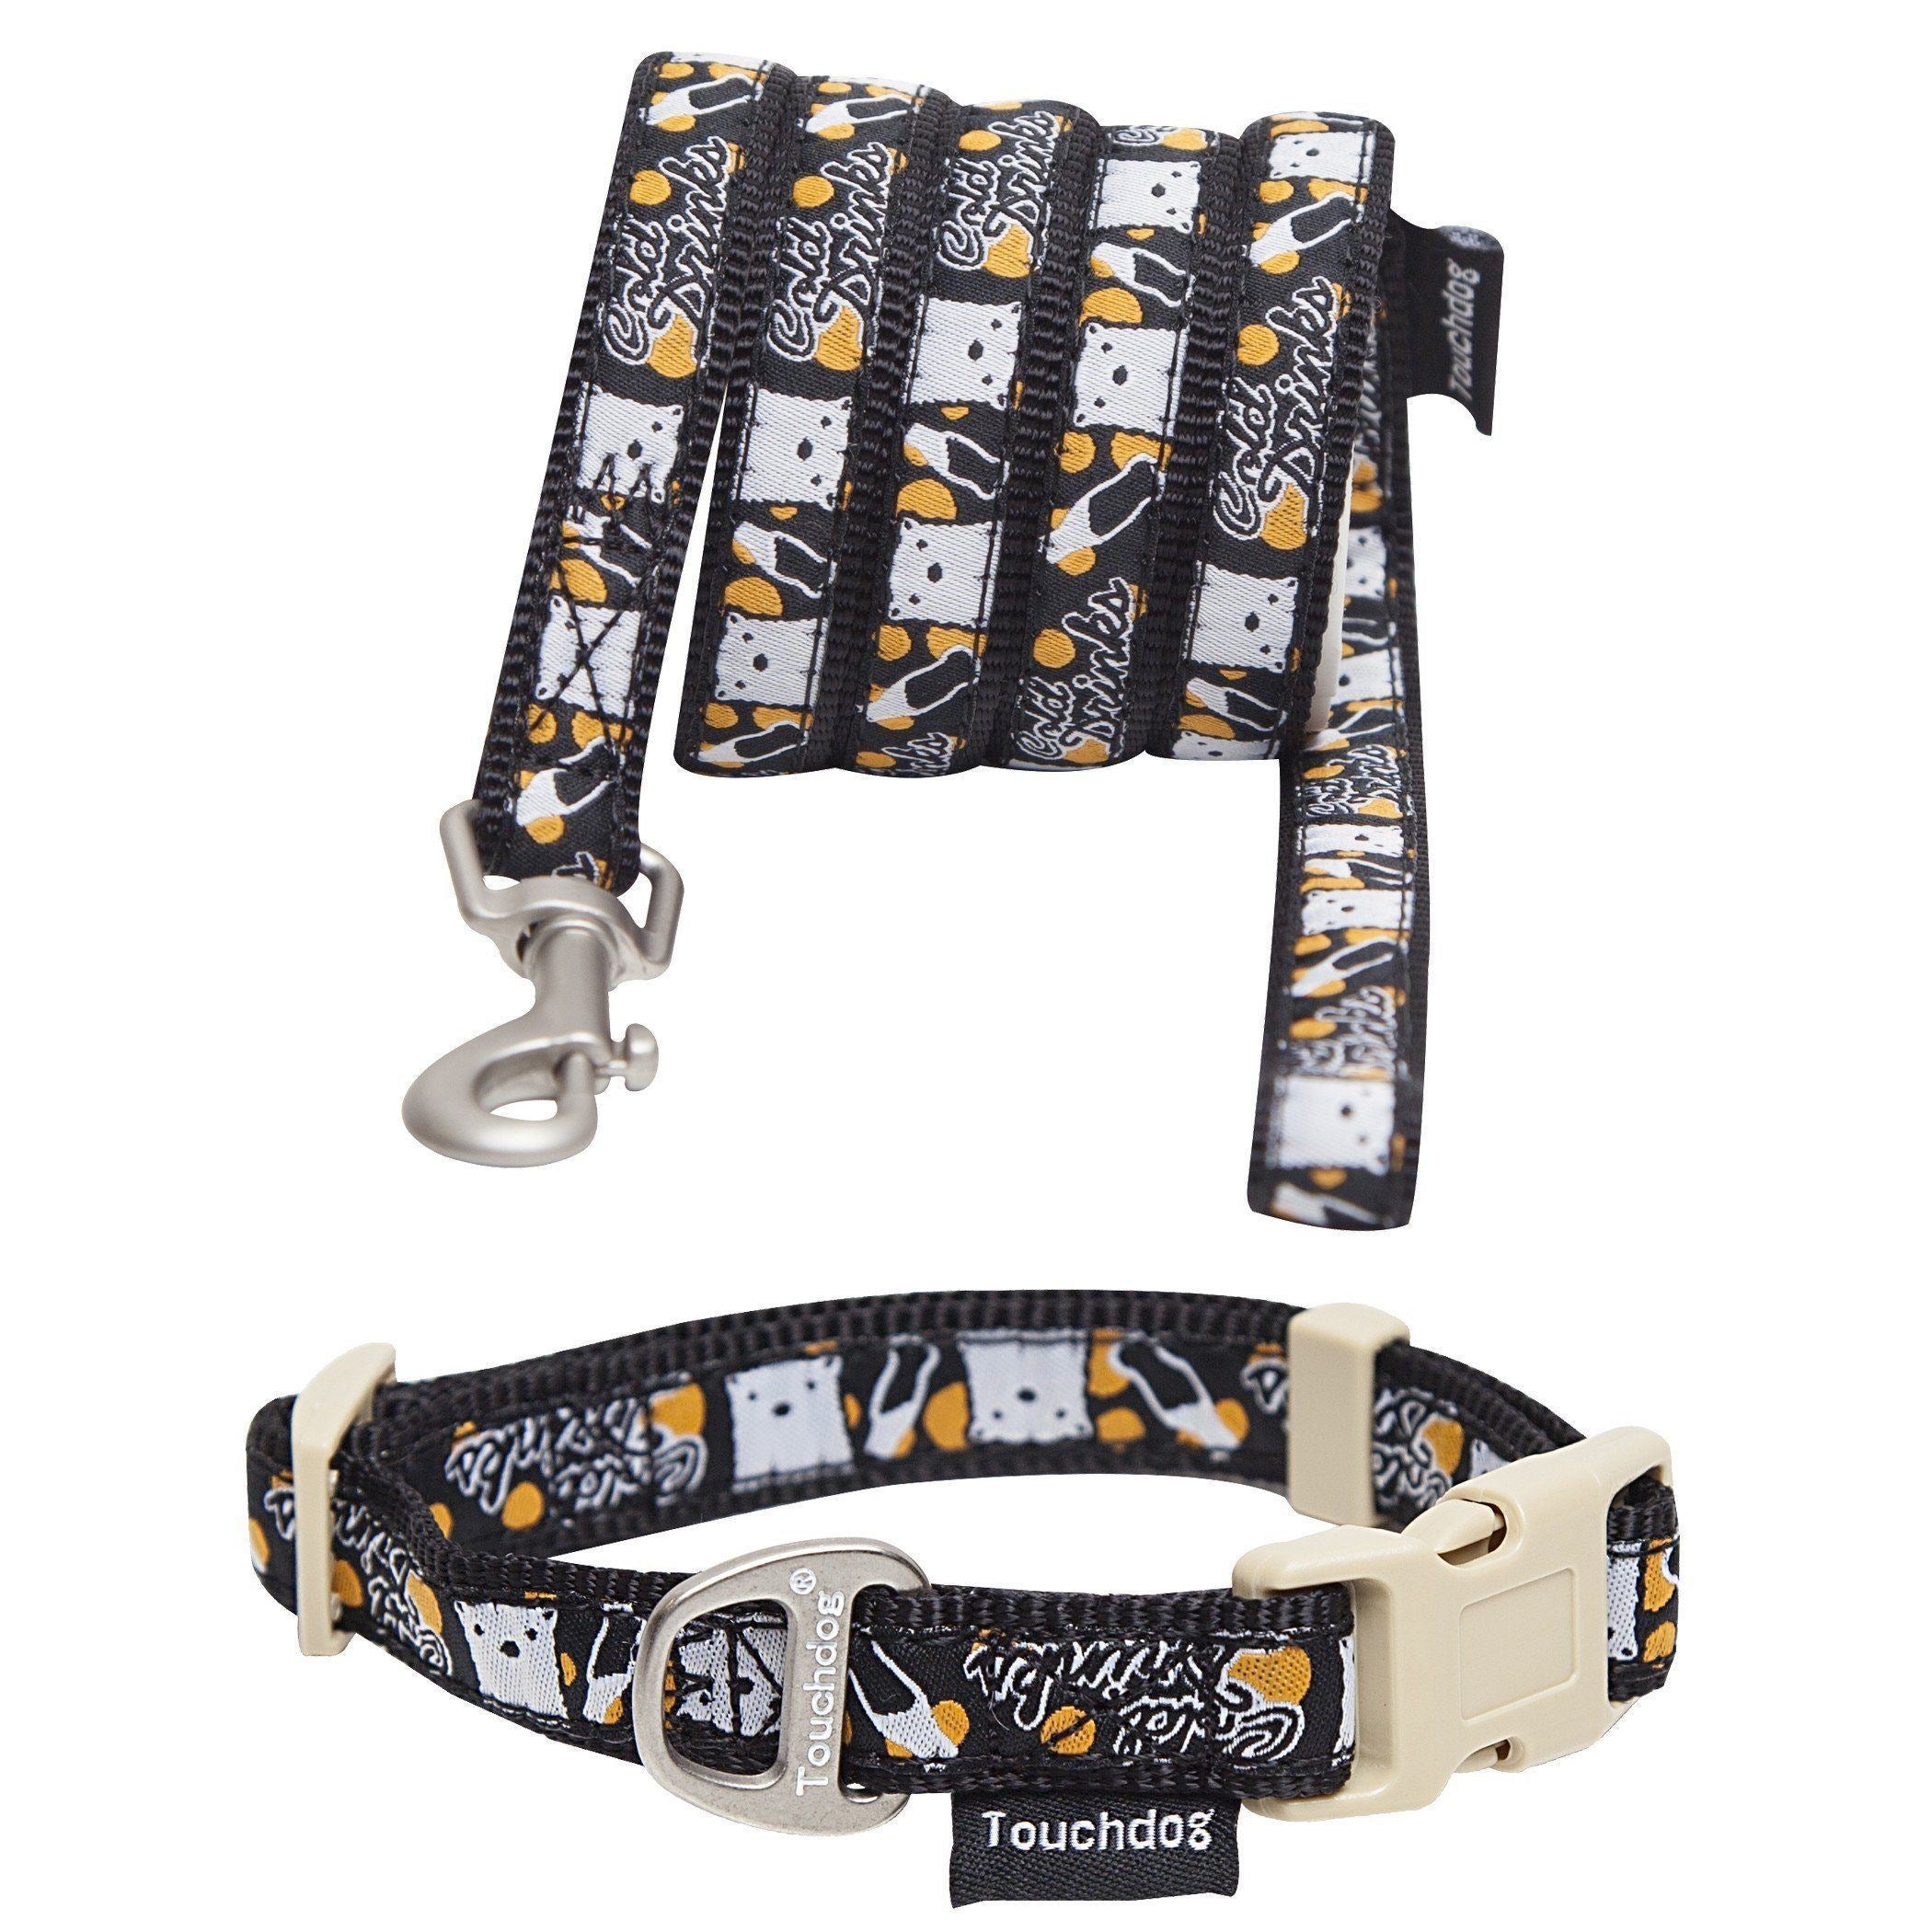 Touchdog ® 'Caliber' Designer Embroidered Fashion Pet Dog Leash and Collar Combination Small Black Pattern